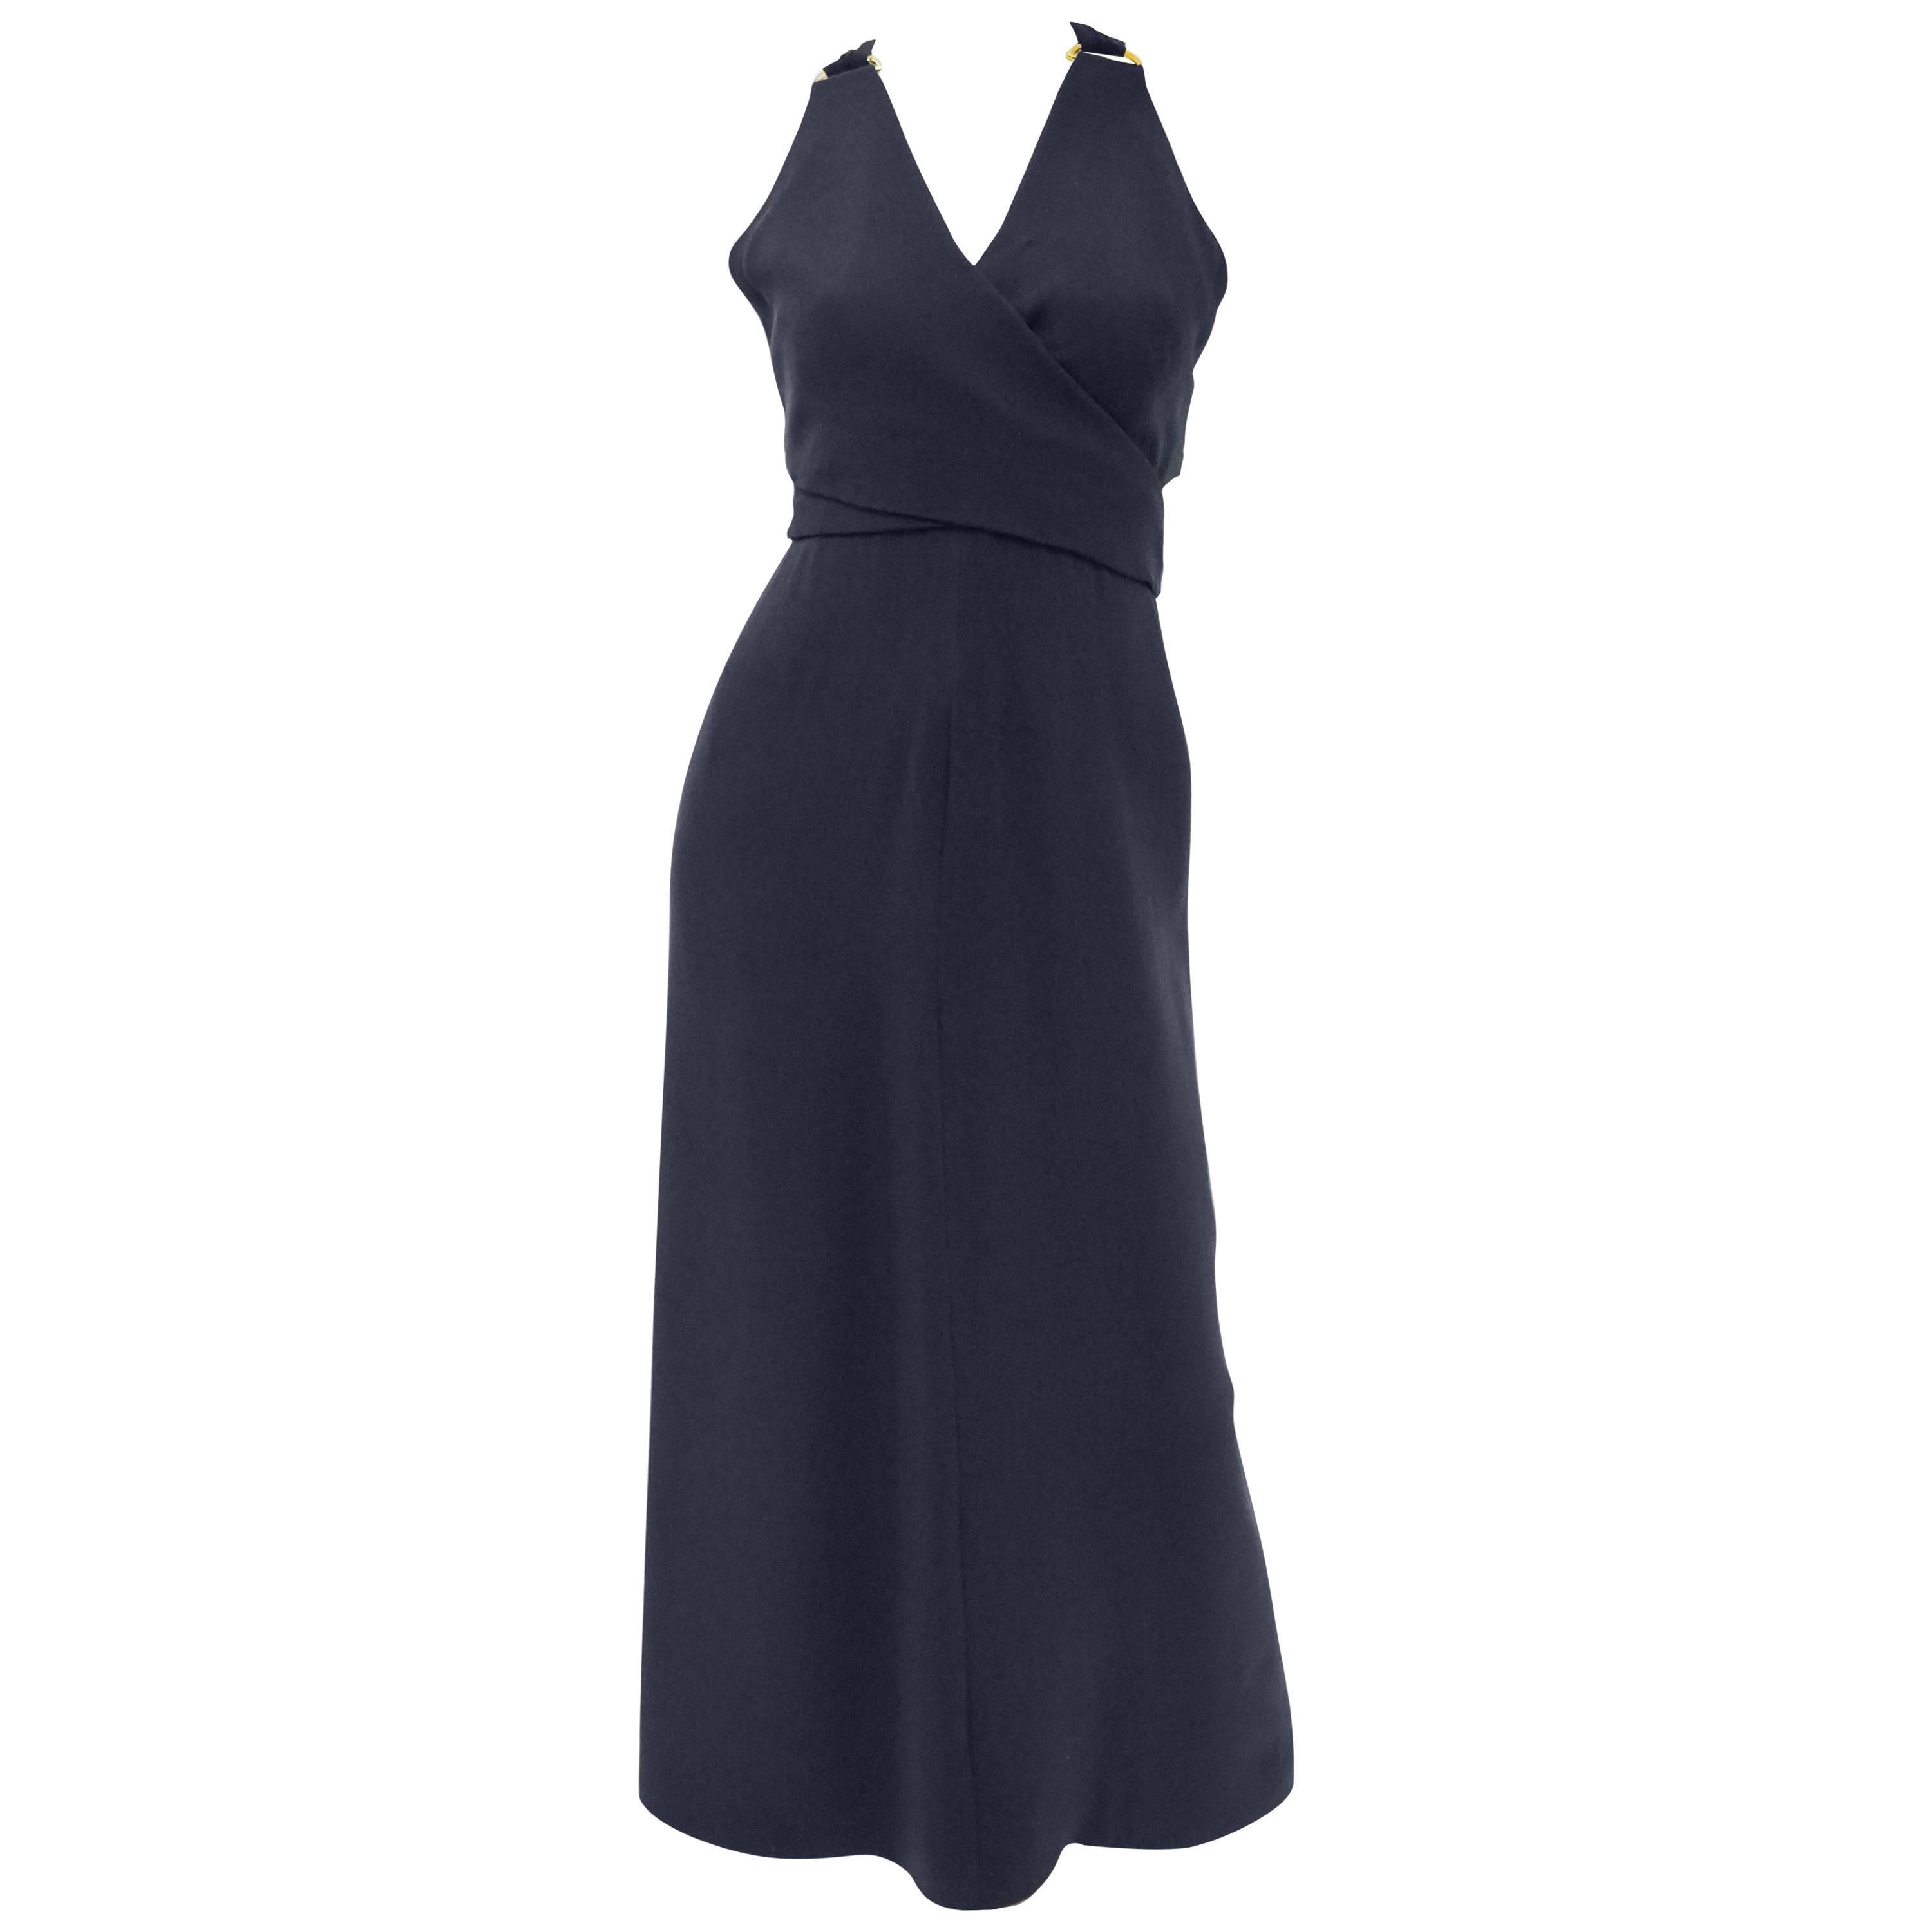 Oh Dior! 

Marc Bohan dreamt up this beautiful navy blue evening dress for Dior's 1971 Spring - Summer season. The dress features a v-neck surplice halter top above a floor-length sheath skirt. The dress has elongated straps that curve around the